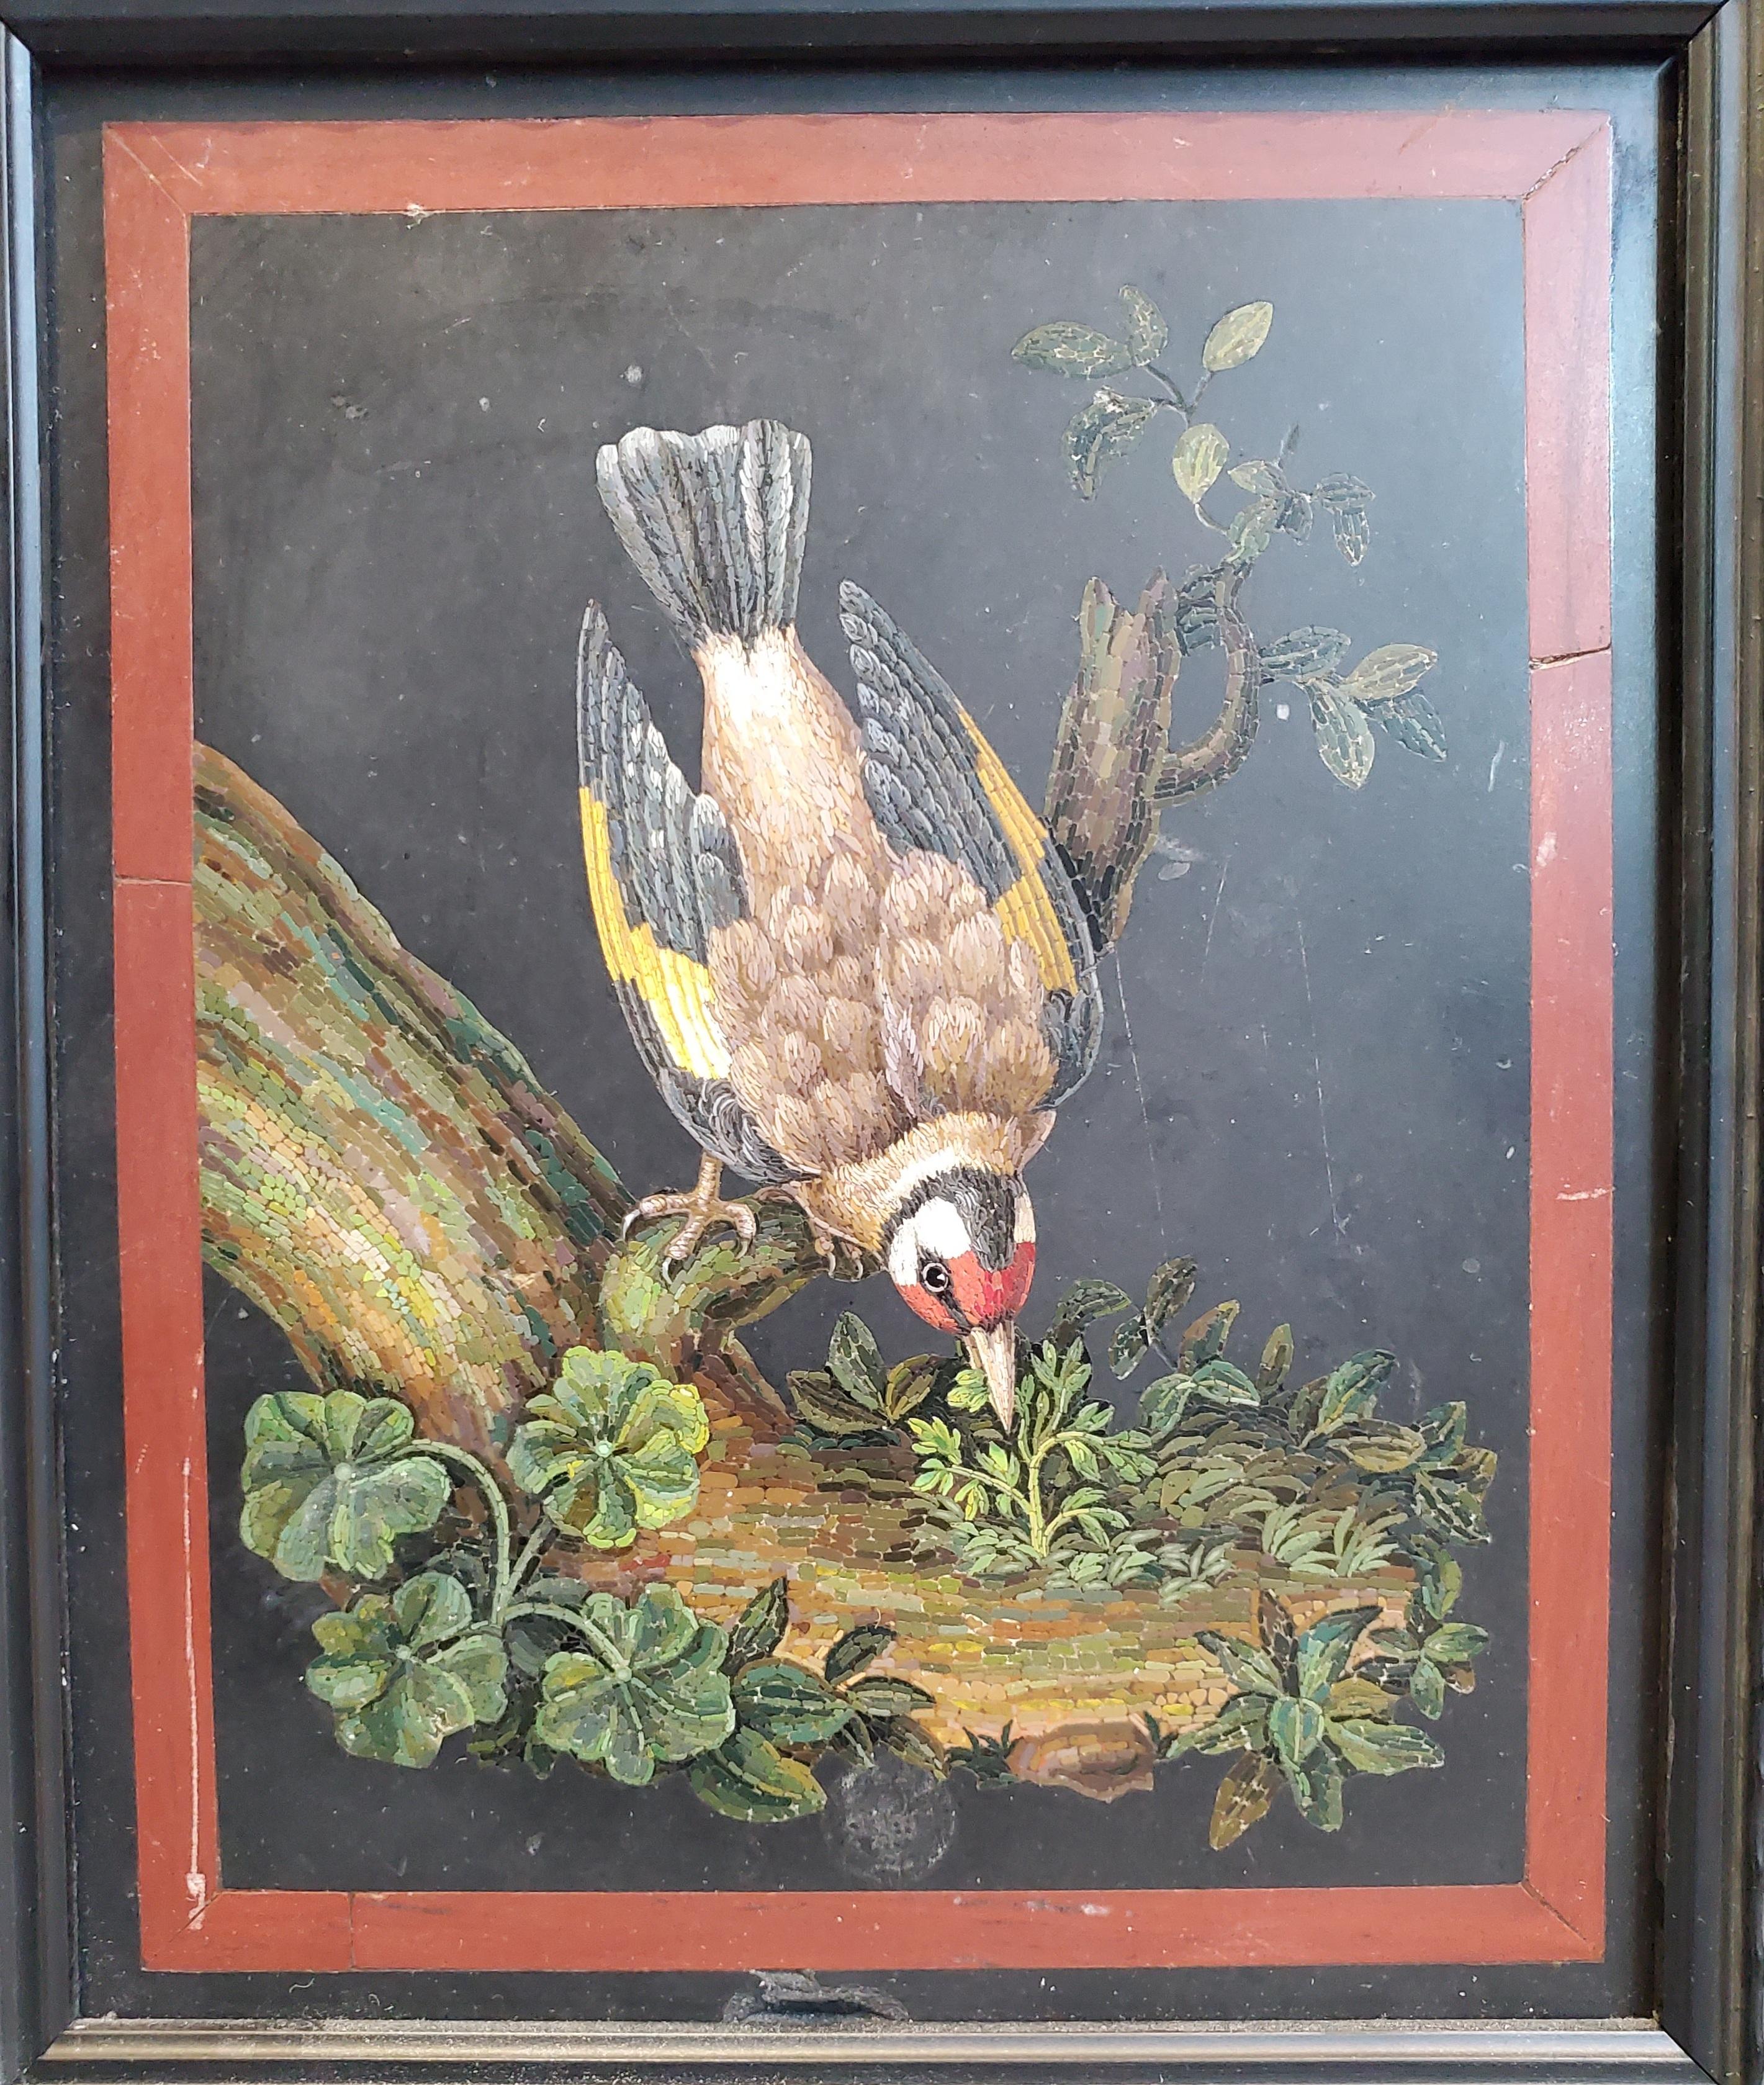 Stone Very Rare 18th Century Micromosaic Depicting a Goldfinch Bird For Sale